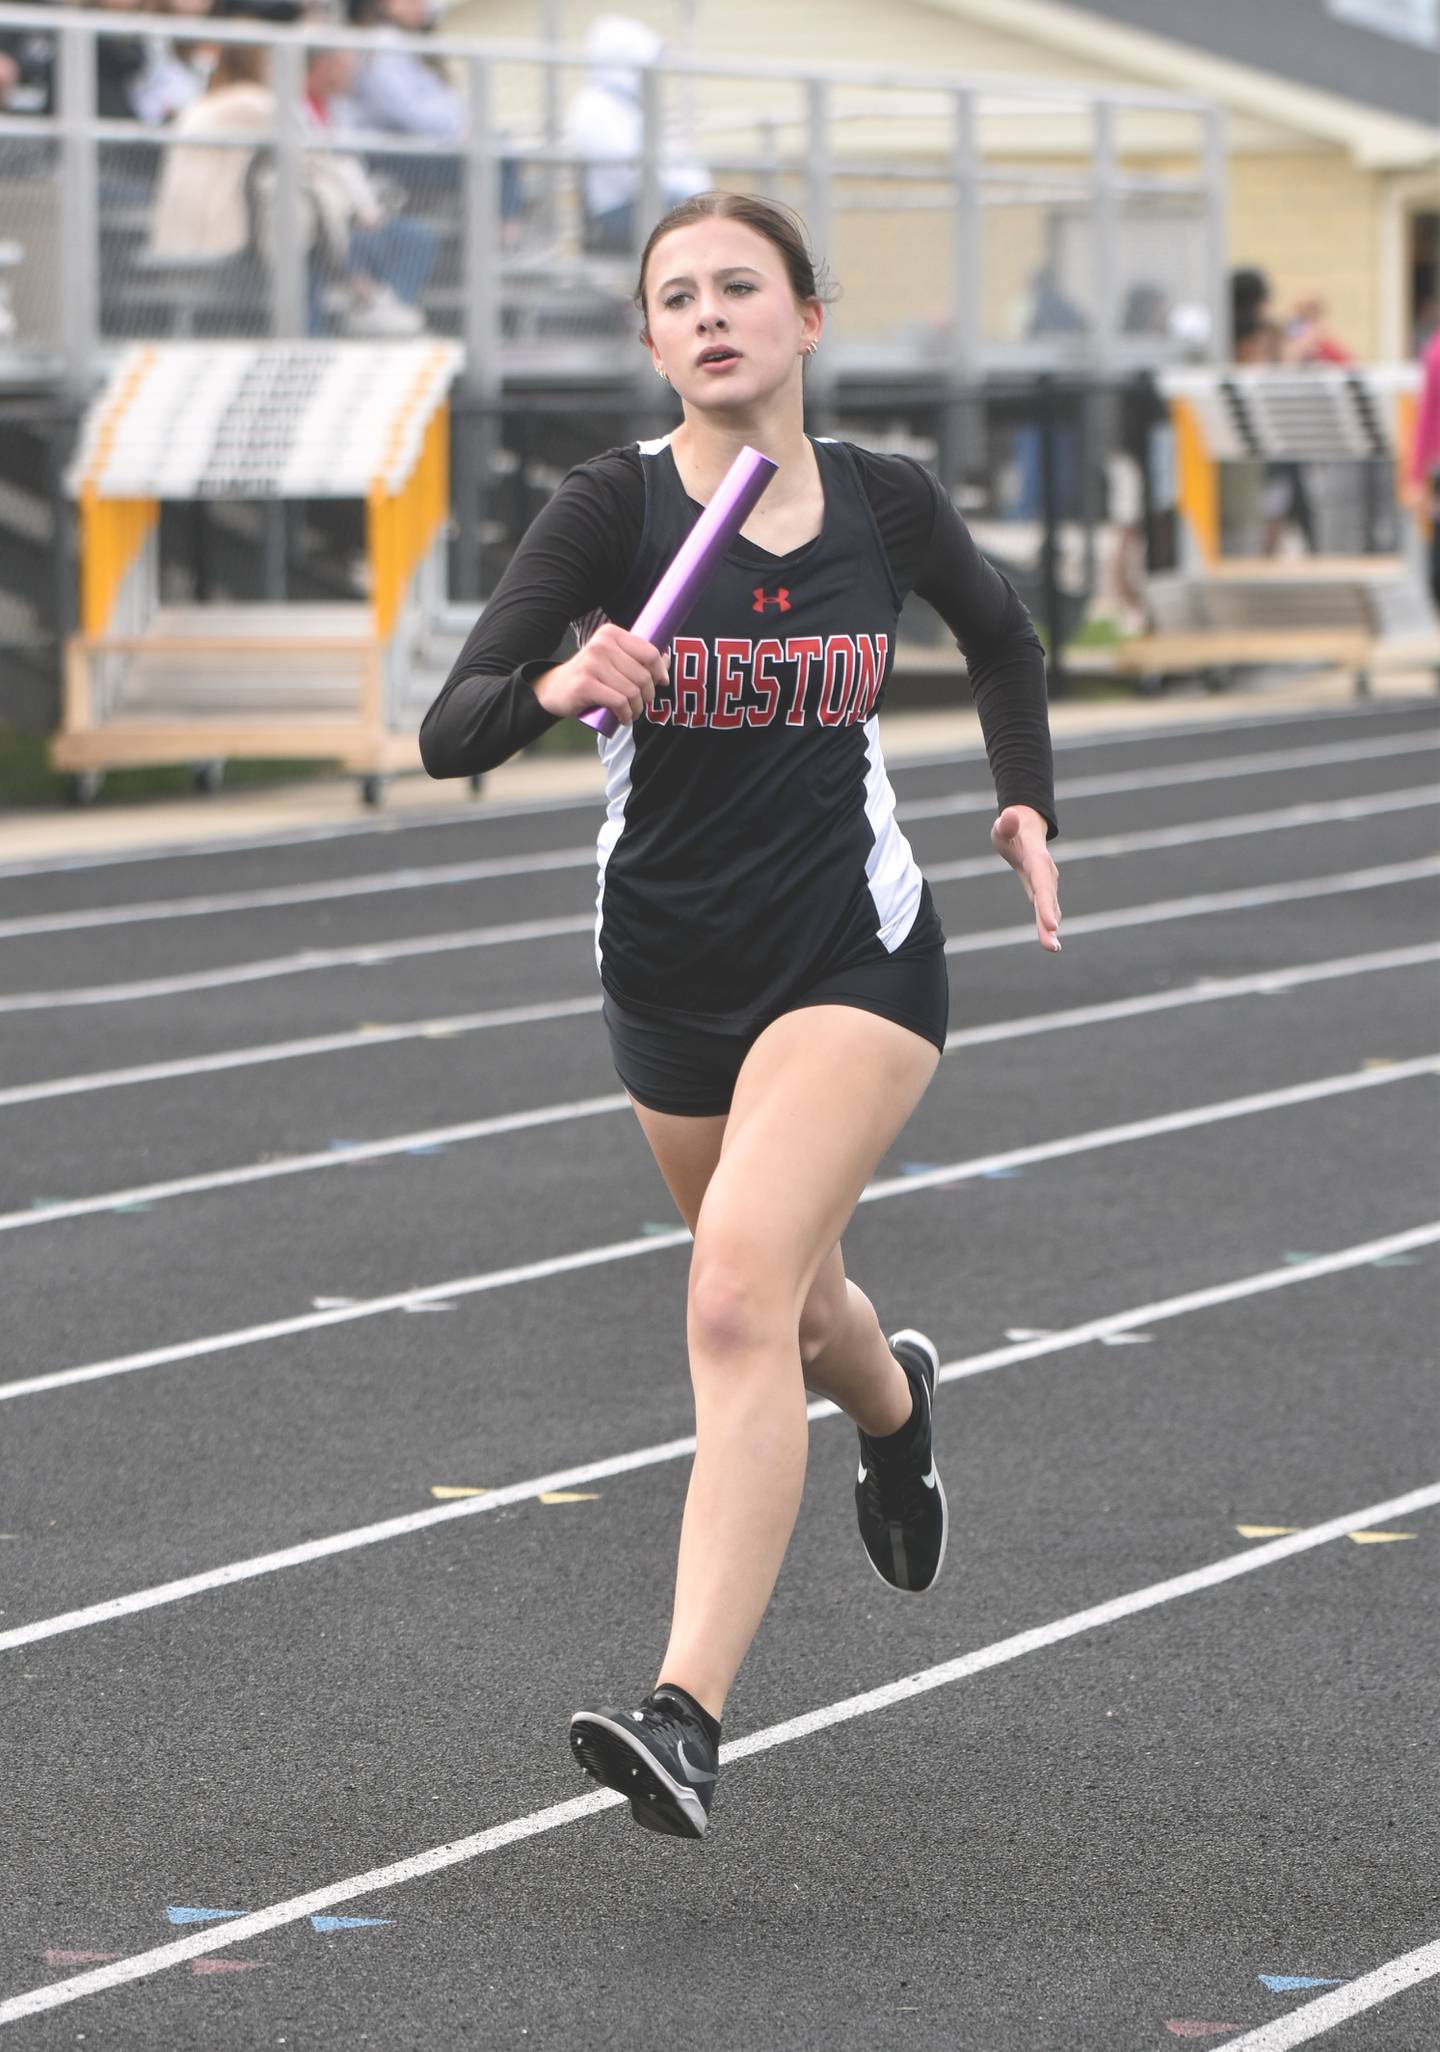 Hope Henderson runs the second leg of the girls 4x800m relay Thursday in Atlantic. The girls qualified with a second-place finish in 10:01.06